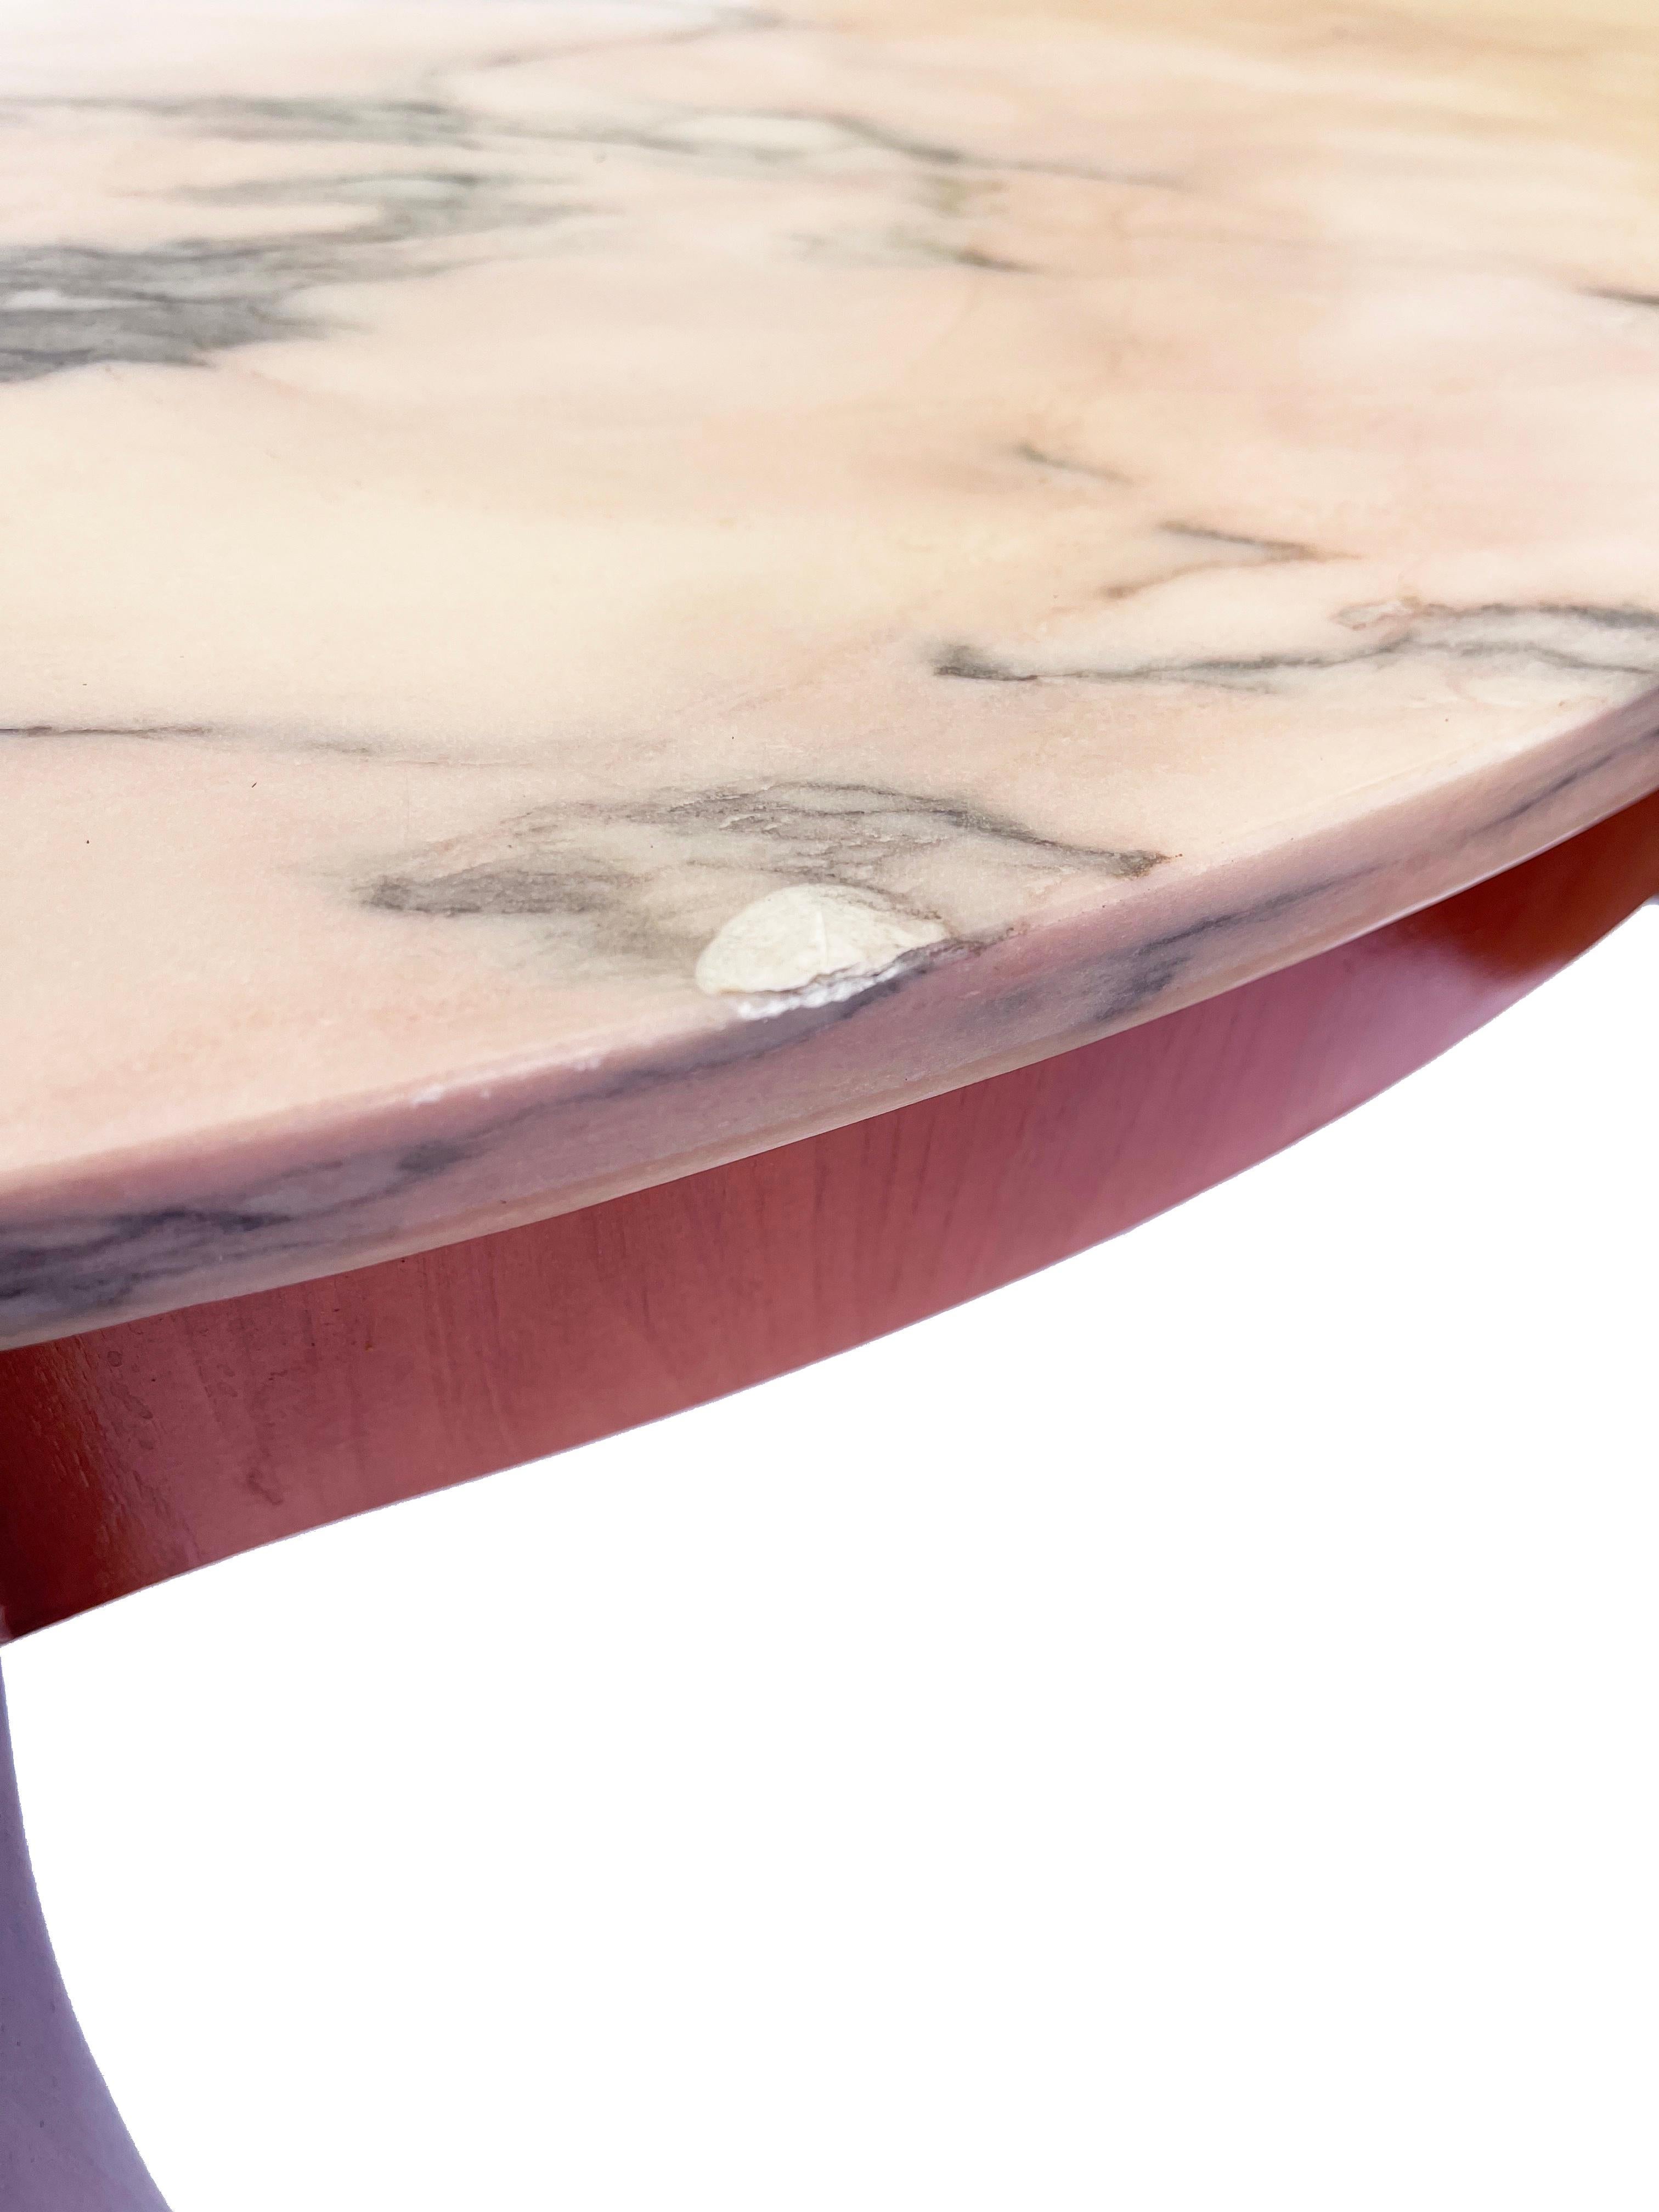 Round Mid-Century Modern Pink Marble Coffee Table, Porto Rosé, 1960s Germany For Sale 13